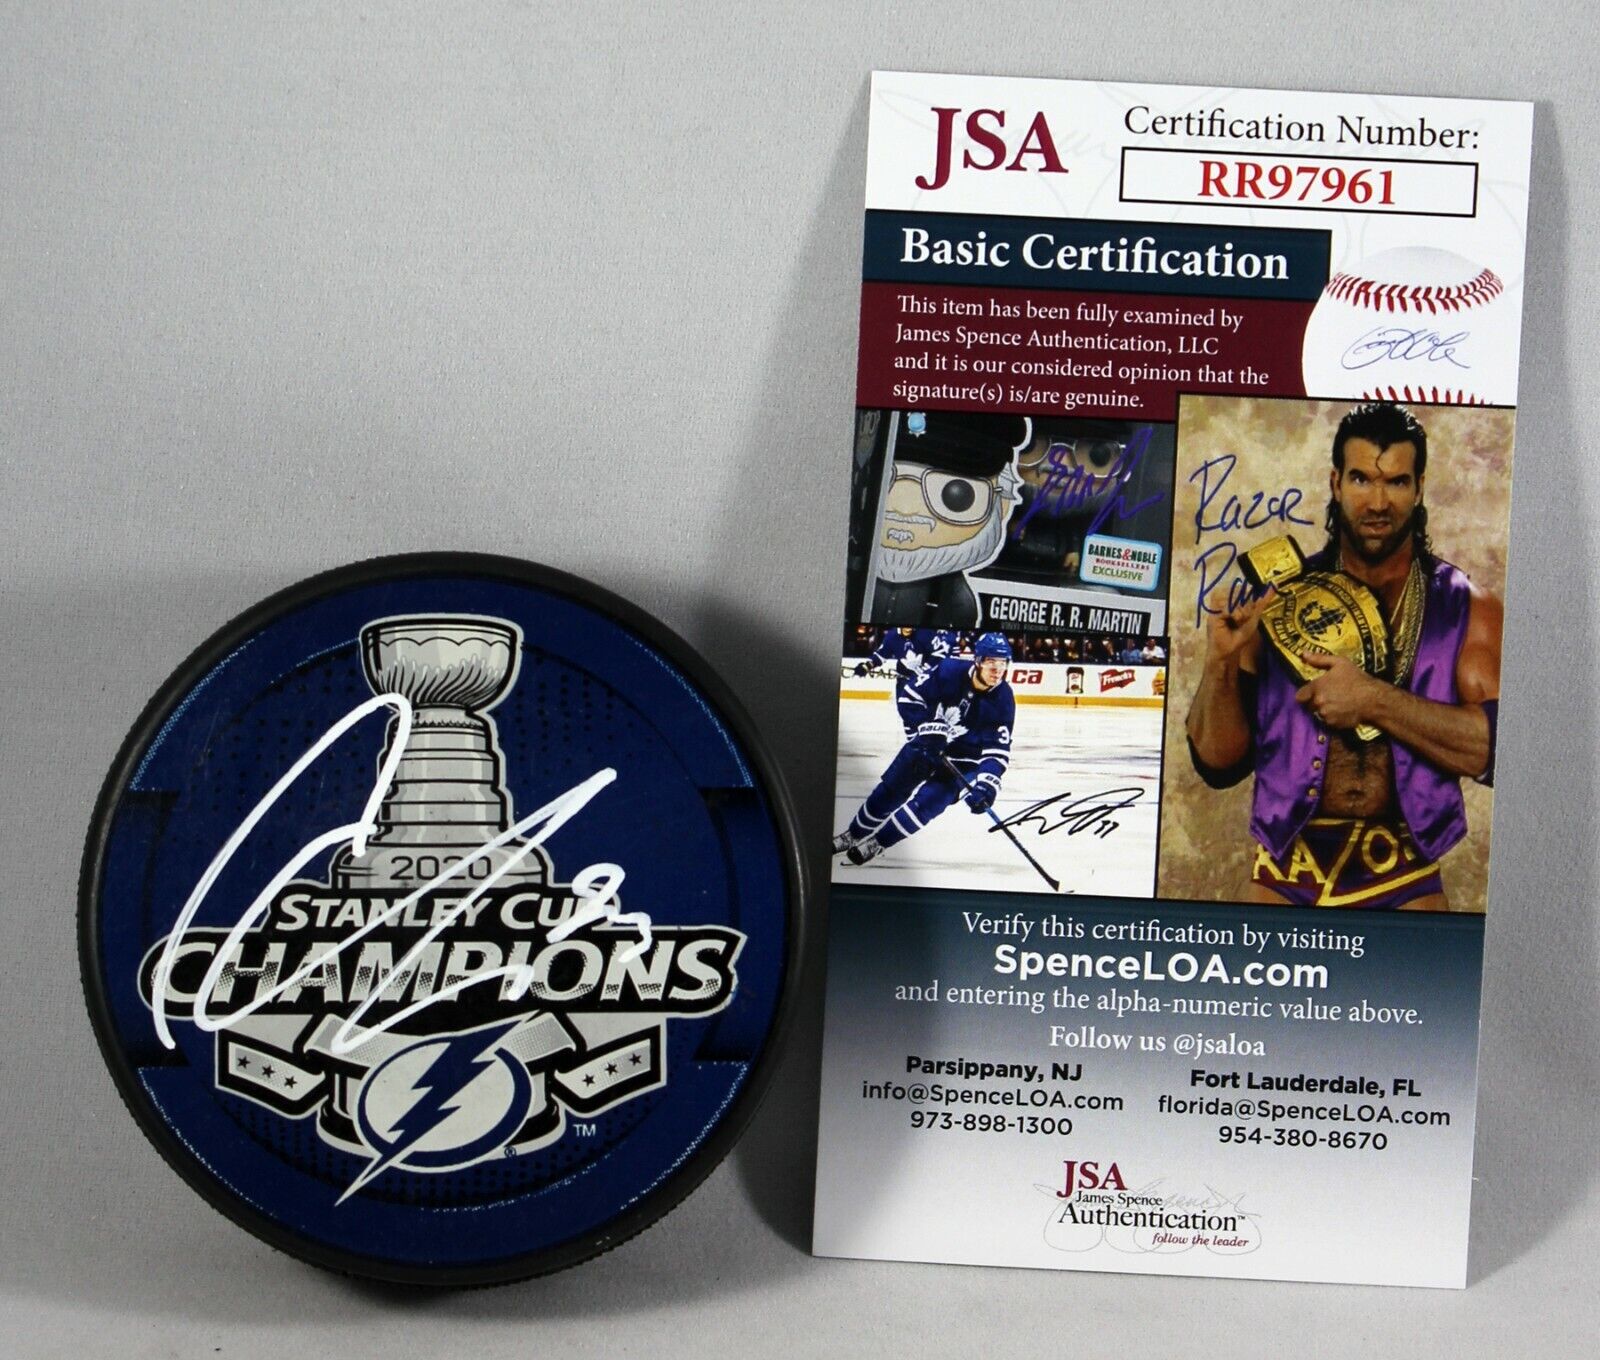 CARTER VERHAEGHE SIGNED 2020 STANLEY CUP CHAMPIONS Puck TAMPA BAY LIGHTNING JSA